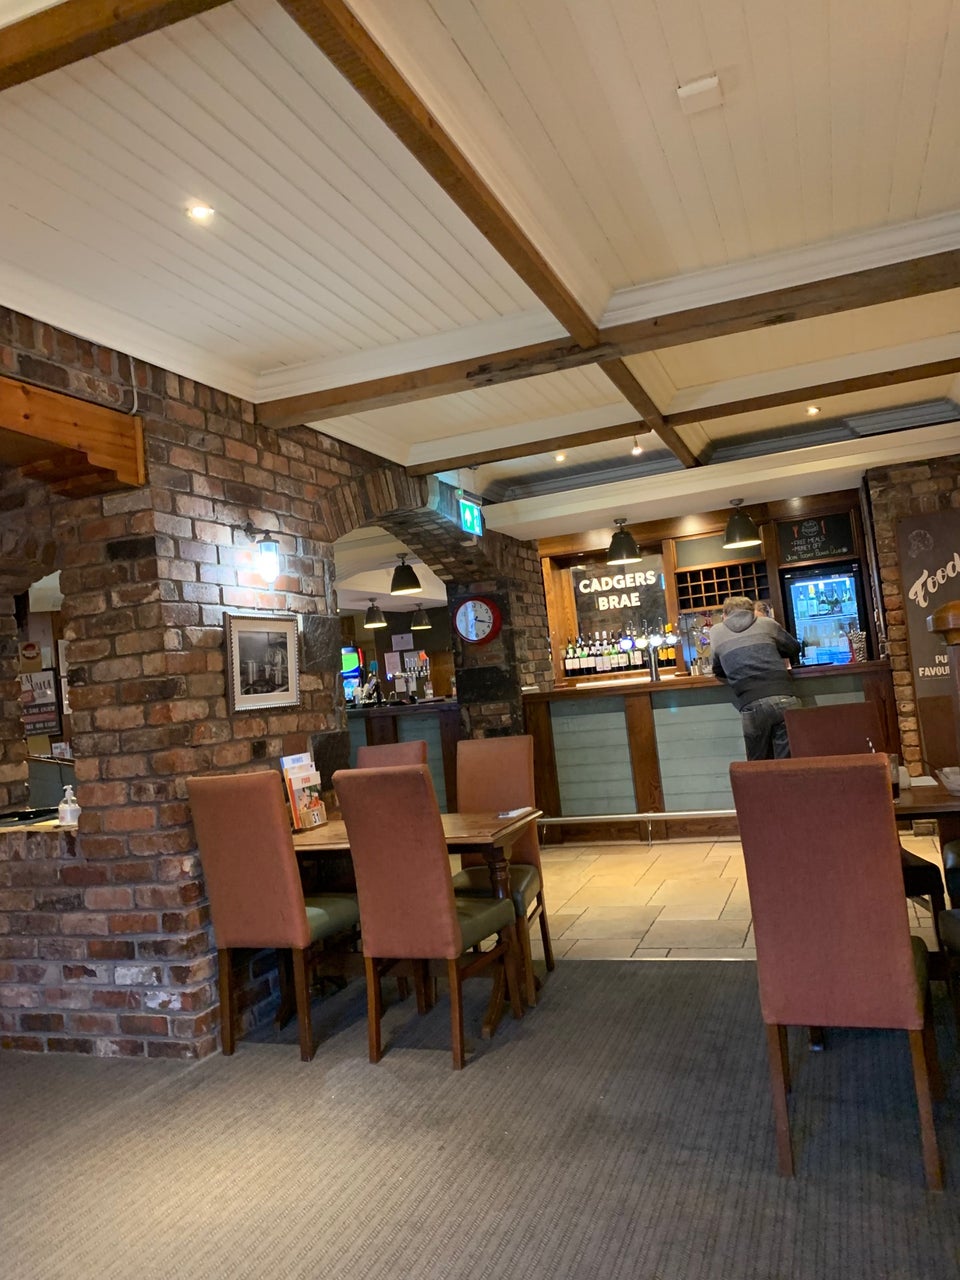 Cadgers Brae Brewers Fayre